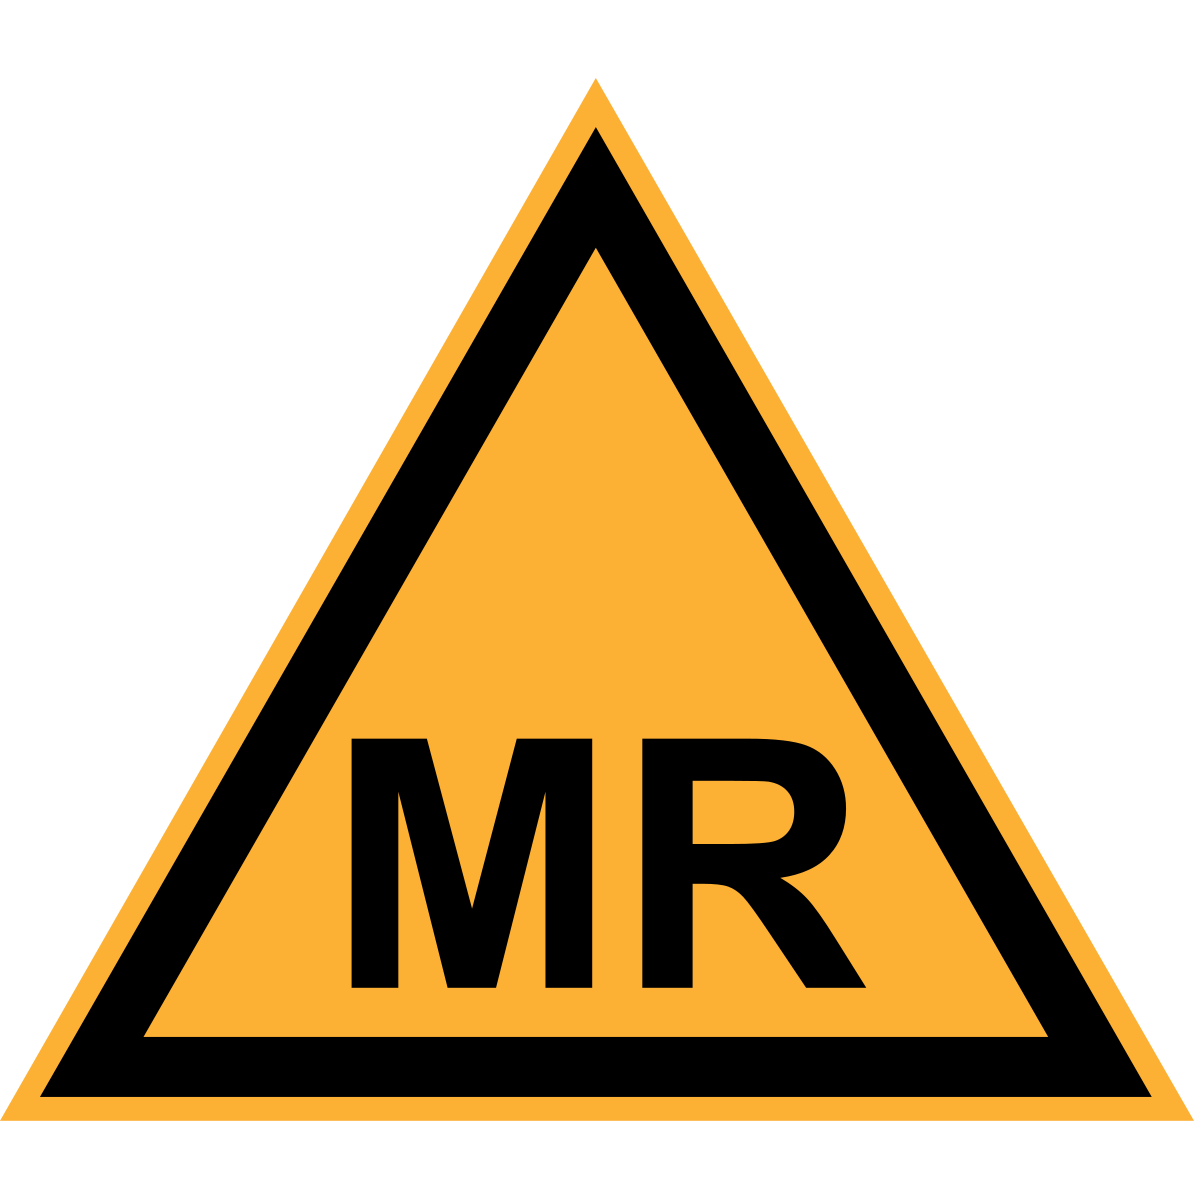 MR conditional sign